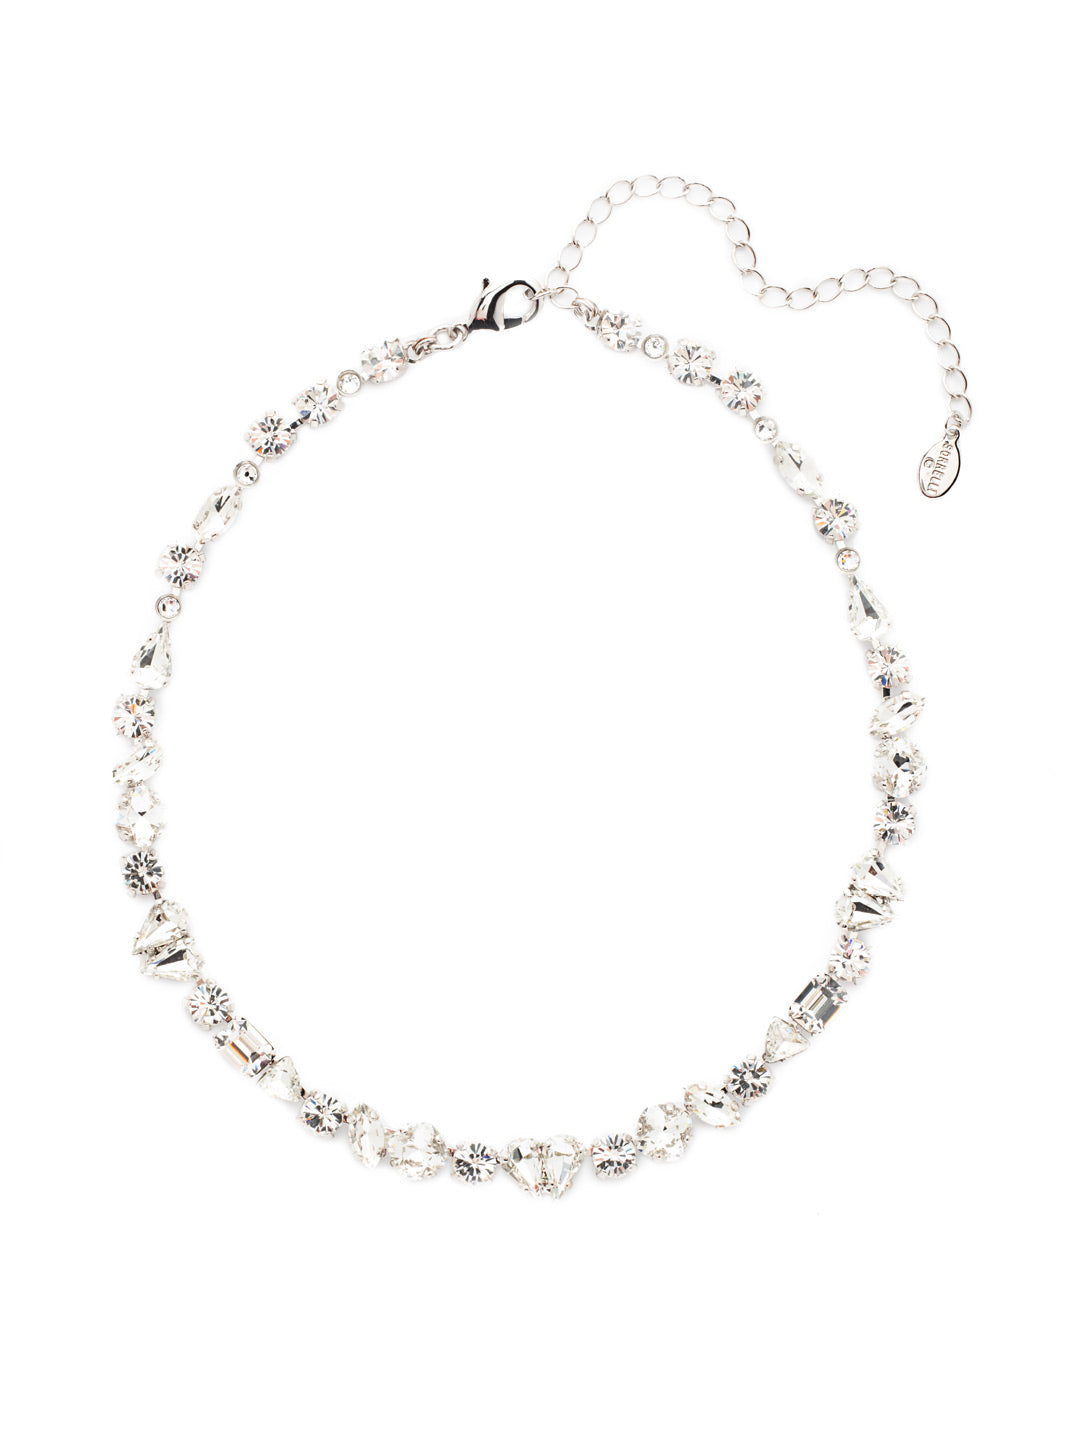 Portia Tennis Necklace - NER8PDCRY - <p>Put on the Portia Tennis Necklace when you want to shine bright. Sparkling crystals line the entire piece in assorted shapes, including pear pieces coming together to form hearts. From Sorrelli's Crystal collection in our Palladium finish.</p>